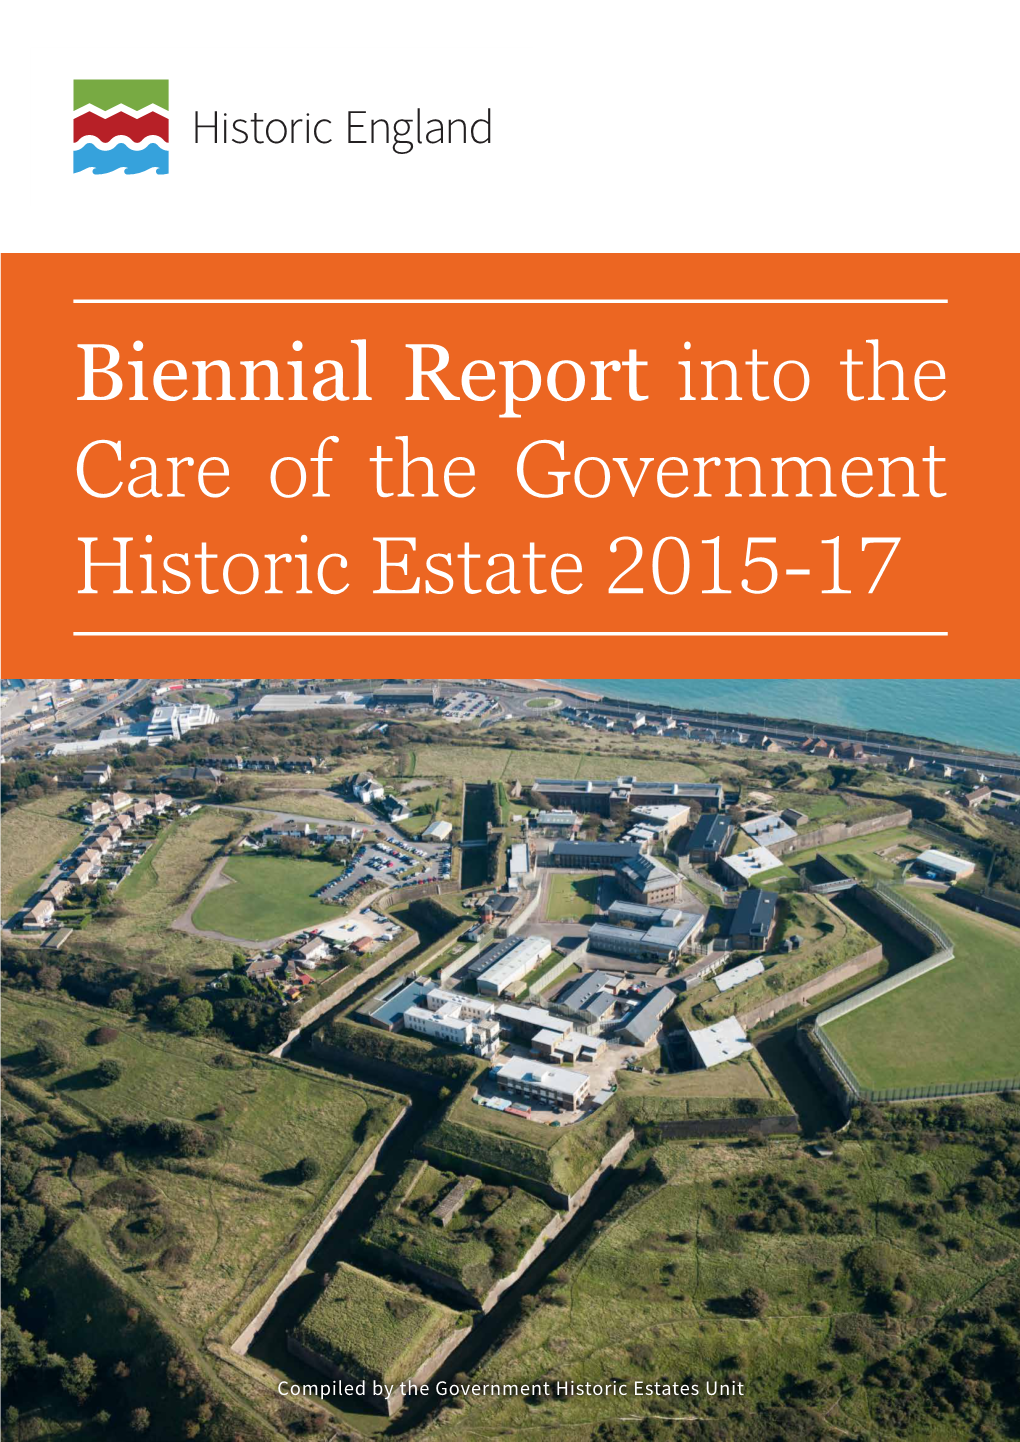 Biennial Report Into the Care of the Government Historic Estate 2015-17